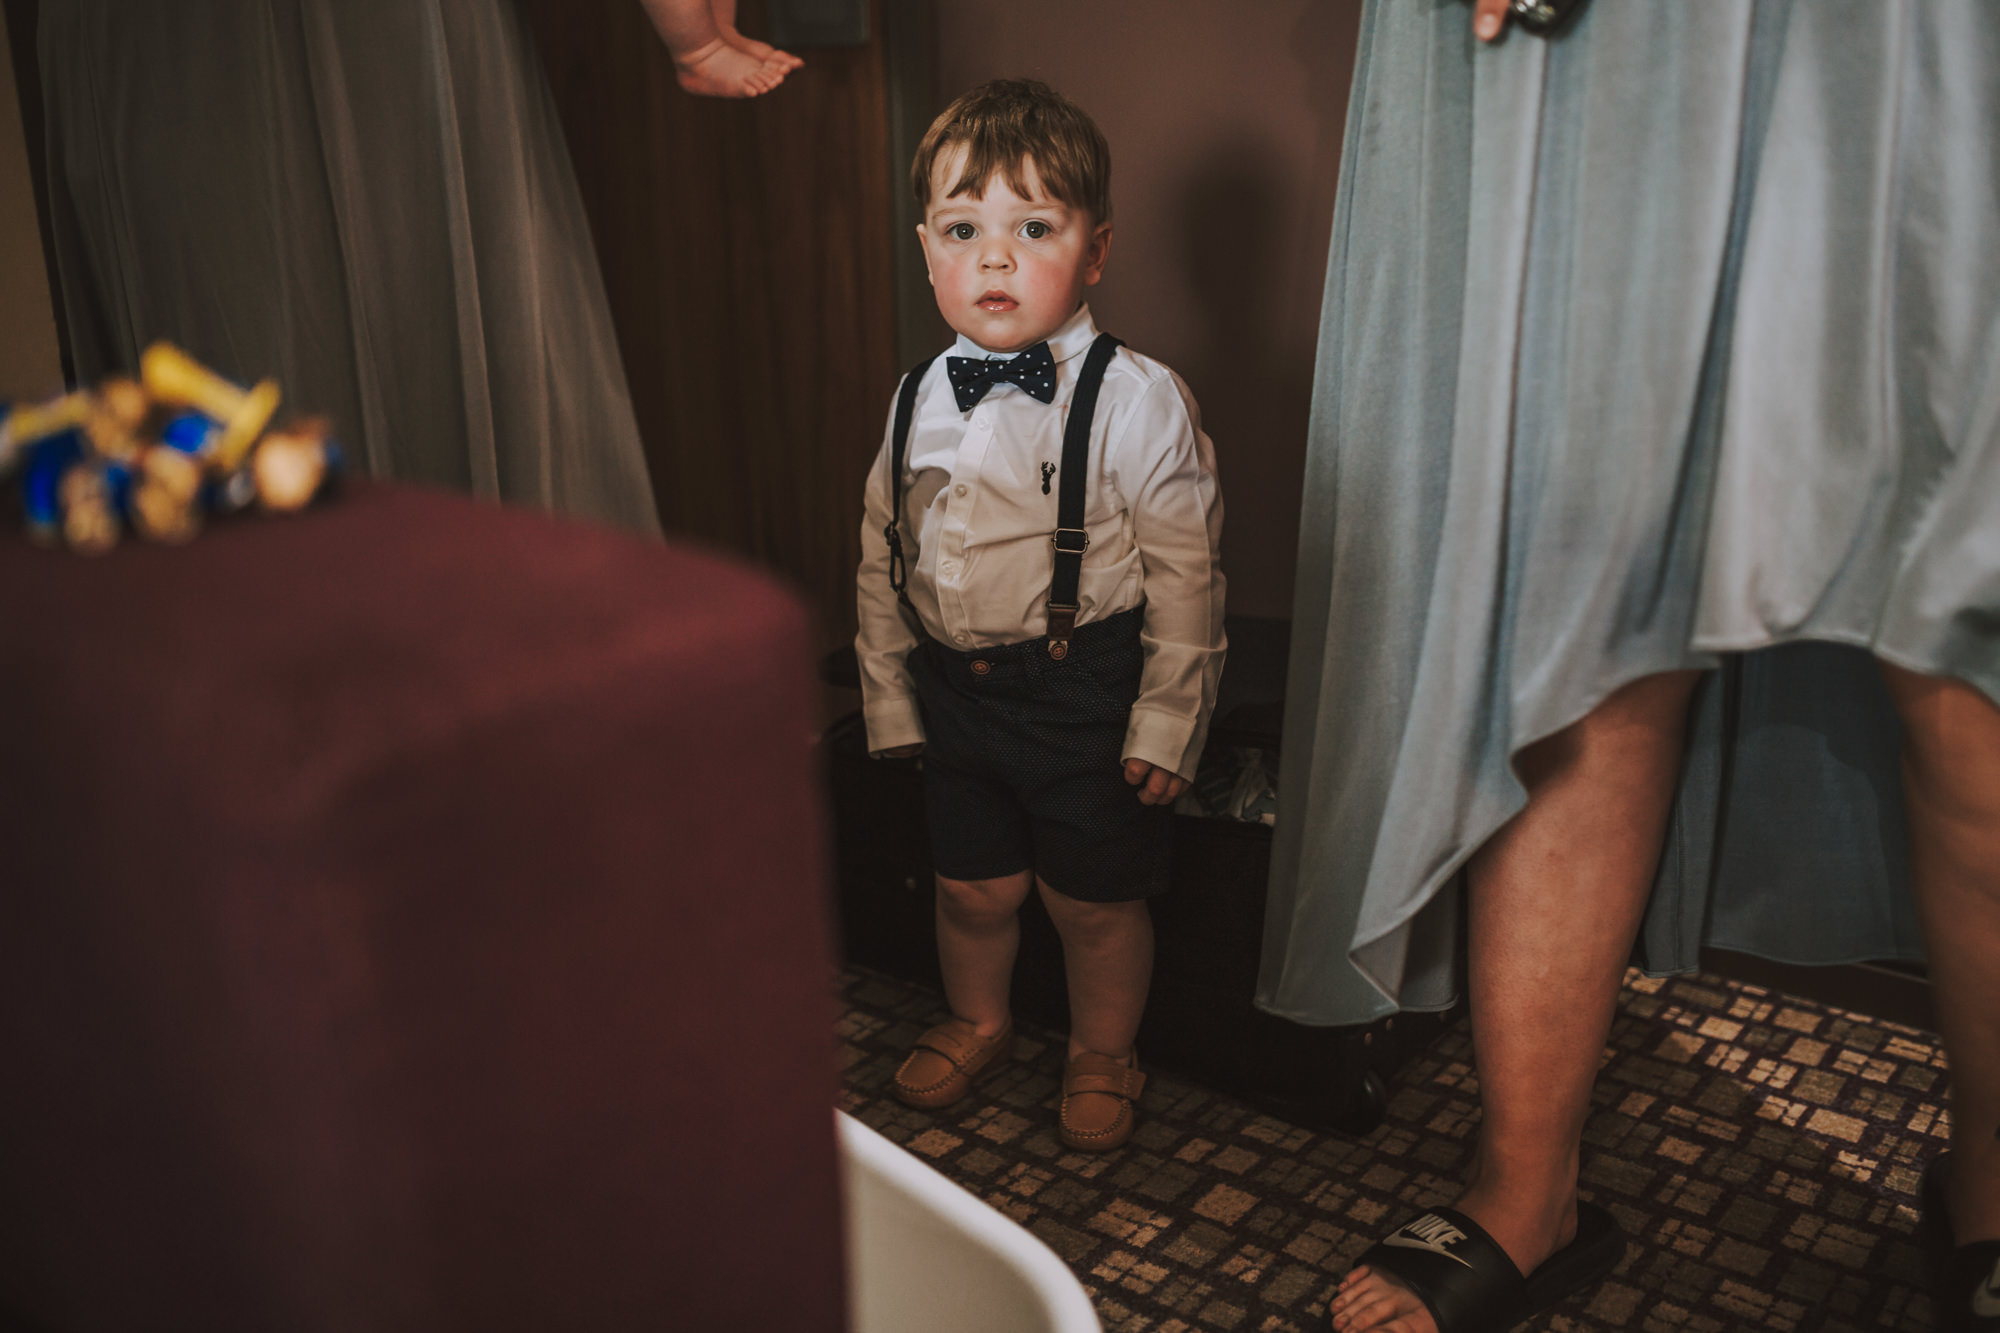 crown hotel bawtry wedding photographers in doncaster, yorkshire-11.jpg